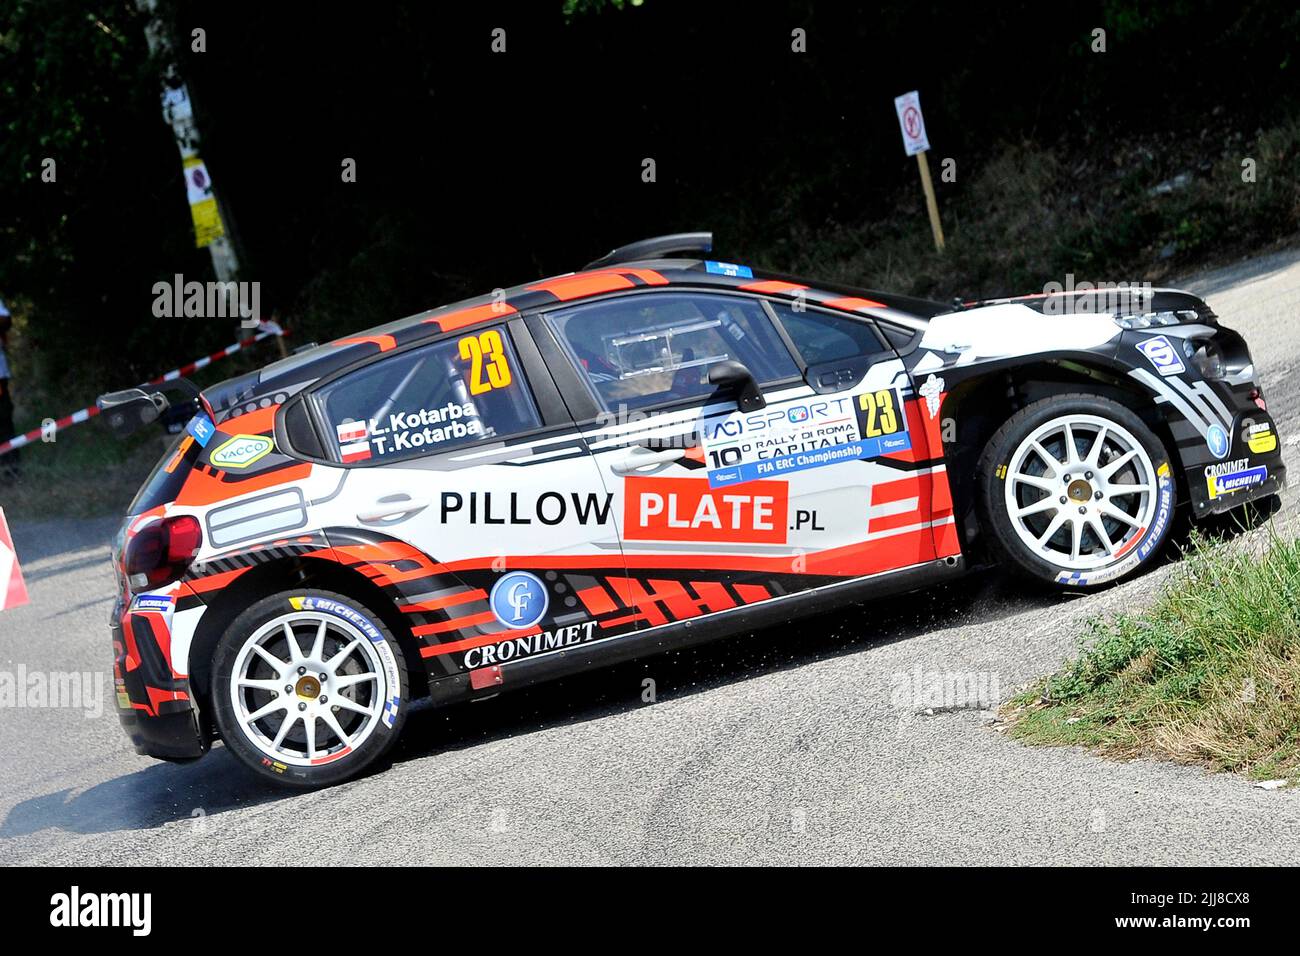 The driver Lukasz Kotarba and his co-driver Adrian Perez aboard their  Citroen C3 Rally2 car, during the Santopadre - Fontana Liri stage of the 10  edition of the FIA European Rally Championship "